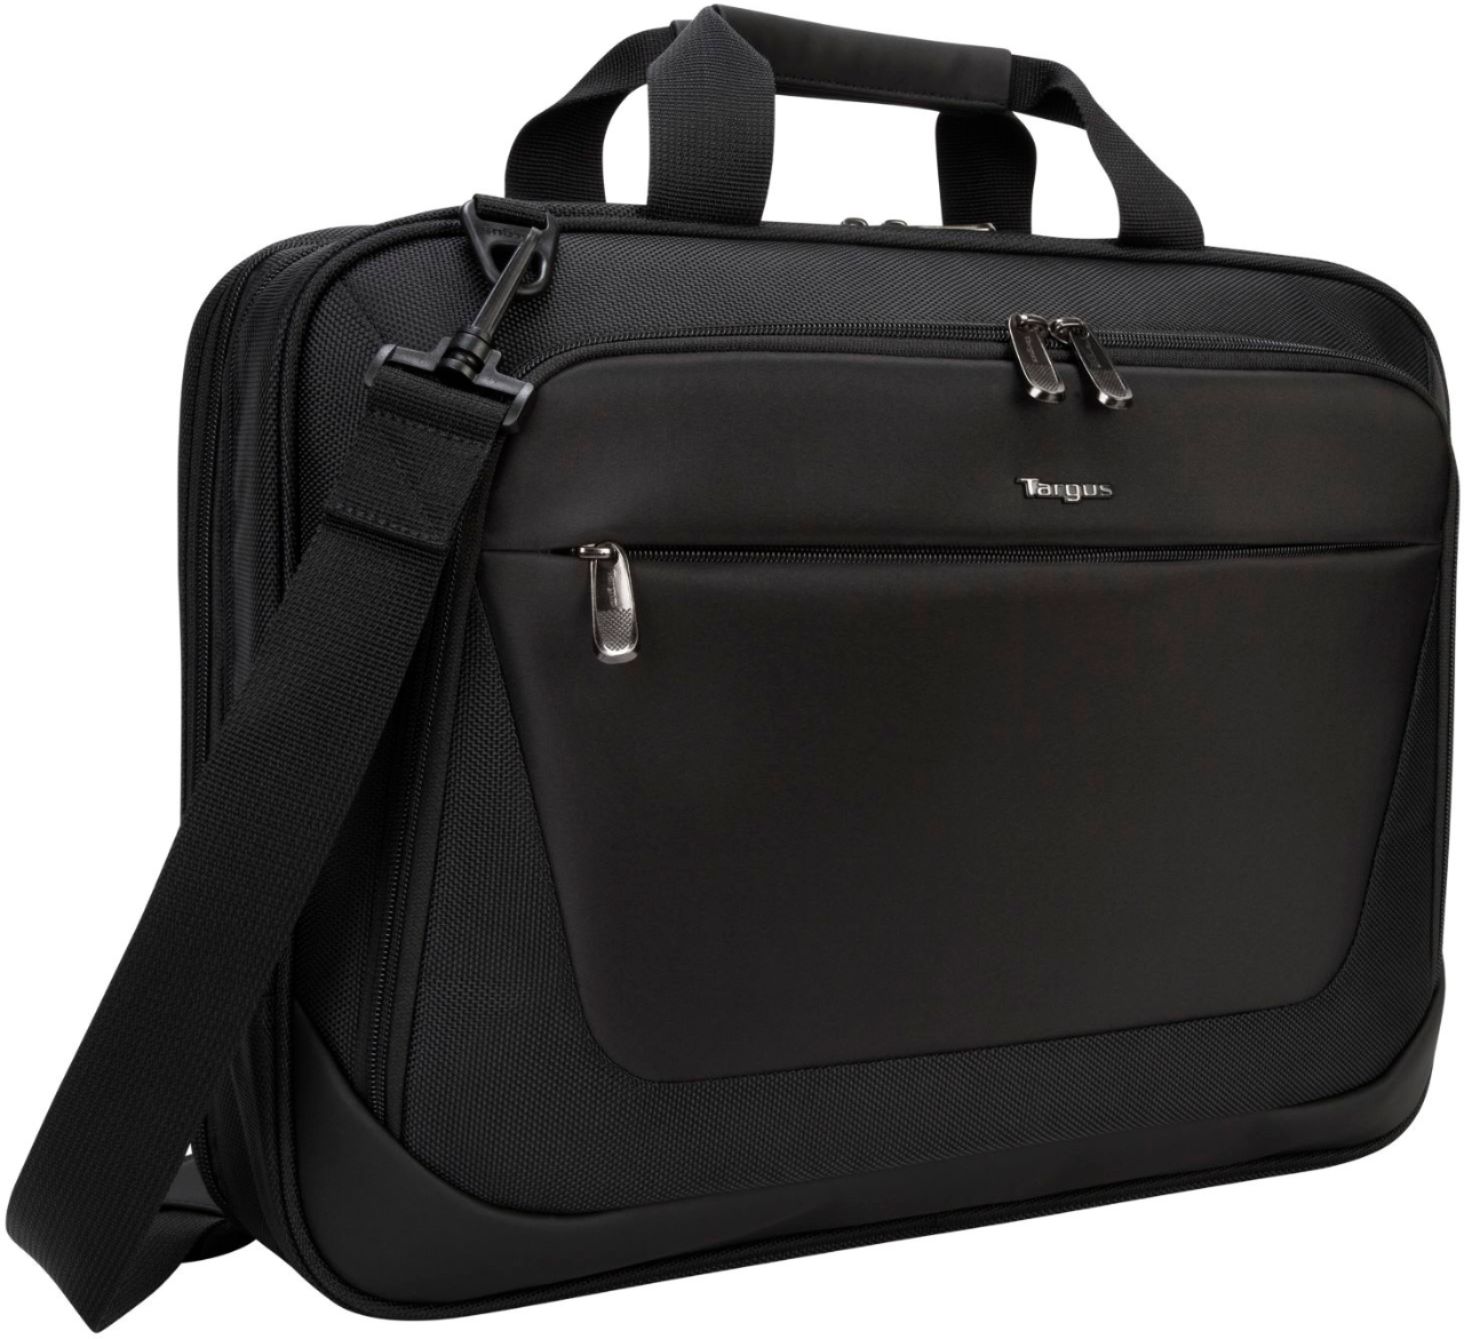 Questions and Answers: Targus CityLite Laptop Case for 15.4